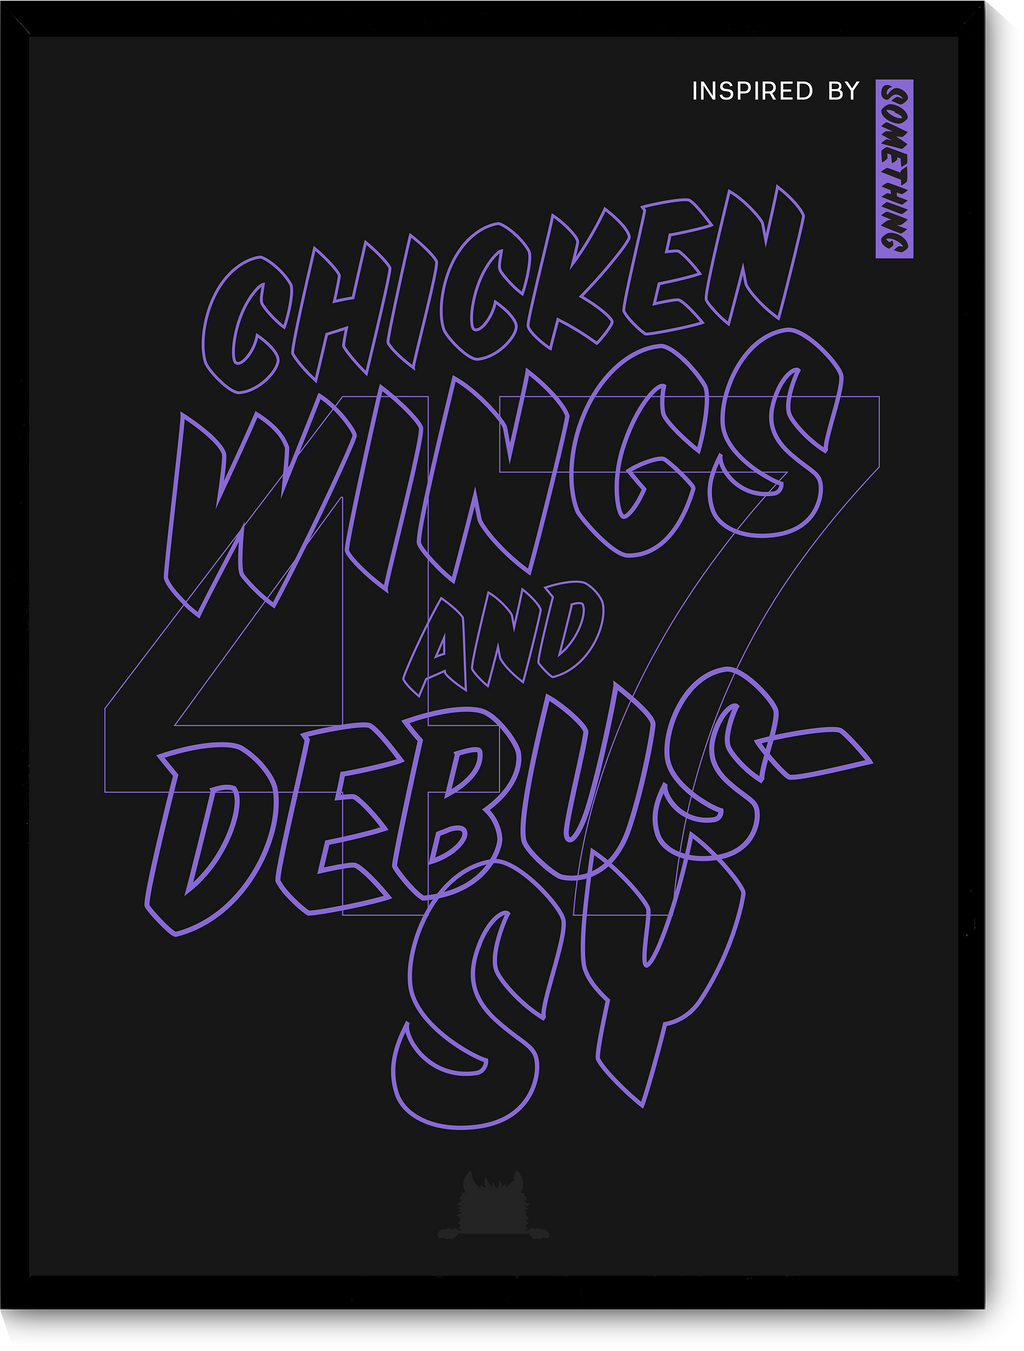 #47 Inspired by chicken wings and Debussy.